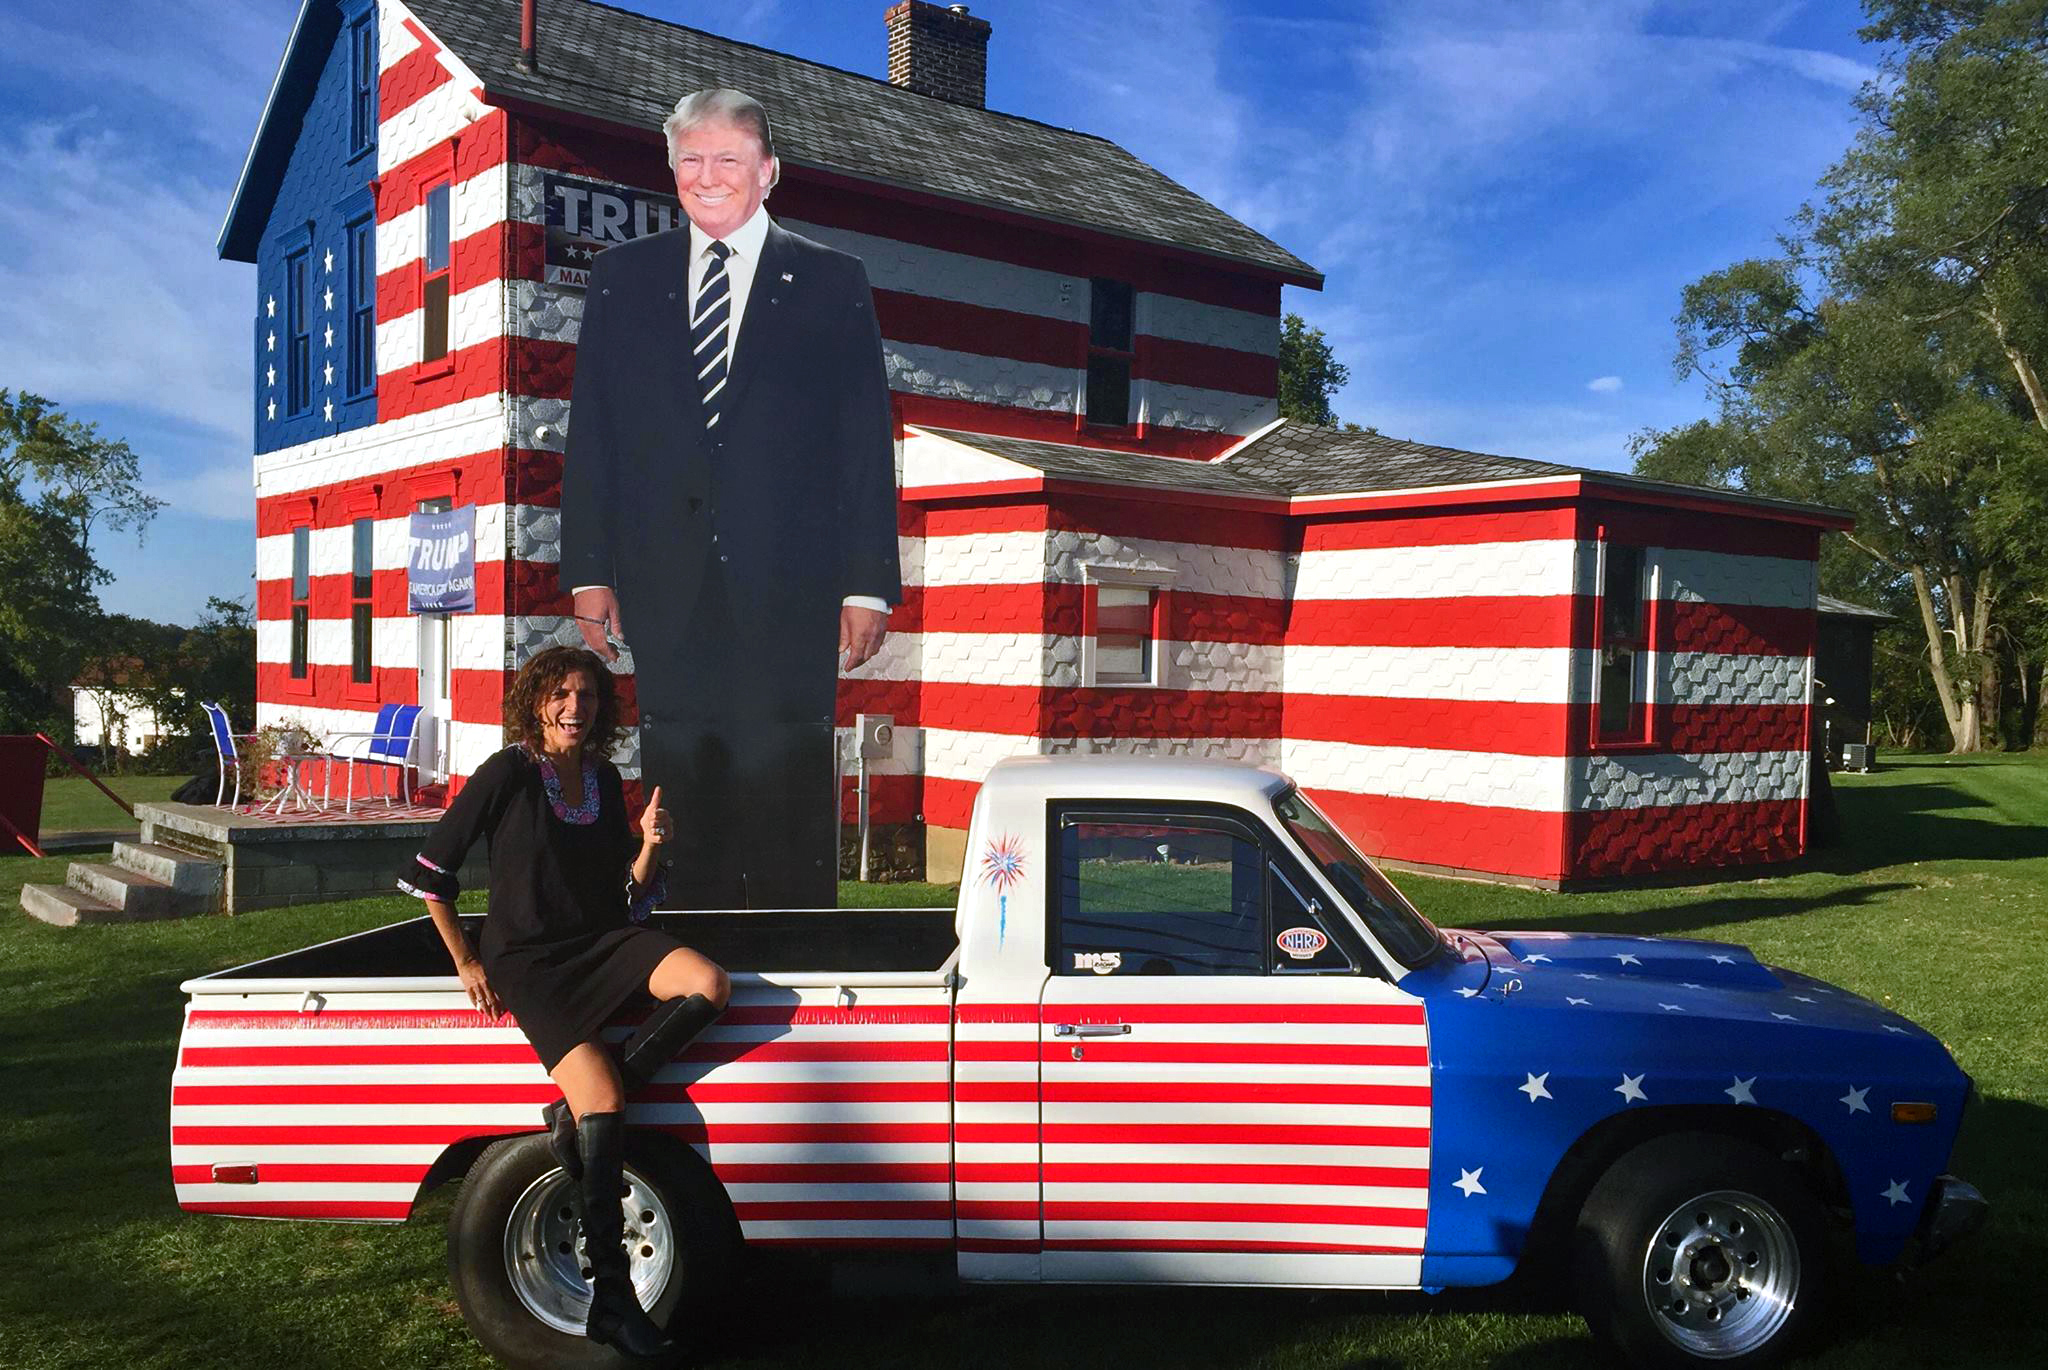 Leslie Rossi sits outside of her "Trump House" in Latrobe, Pennsylvania. She said thousands of people check out the house every week.